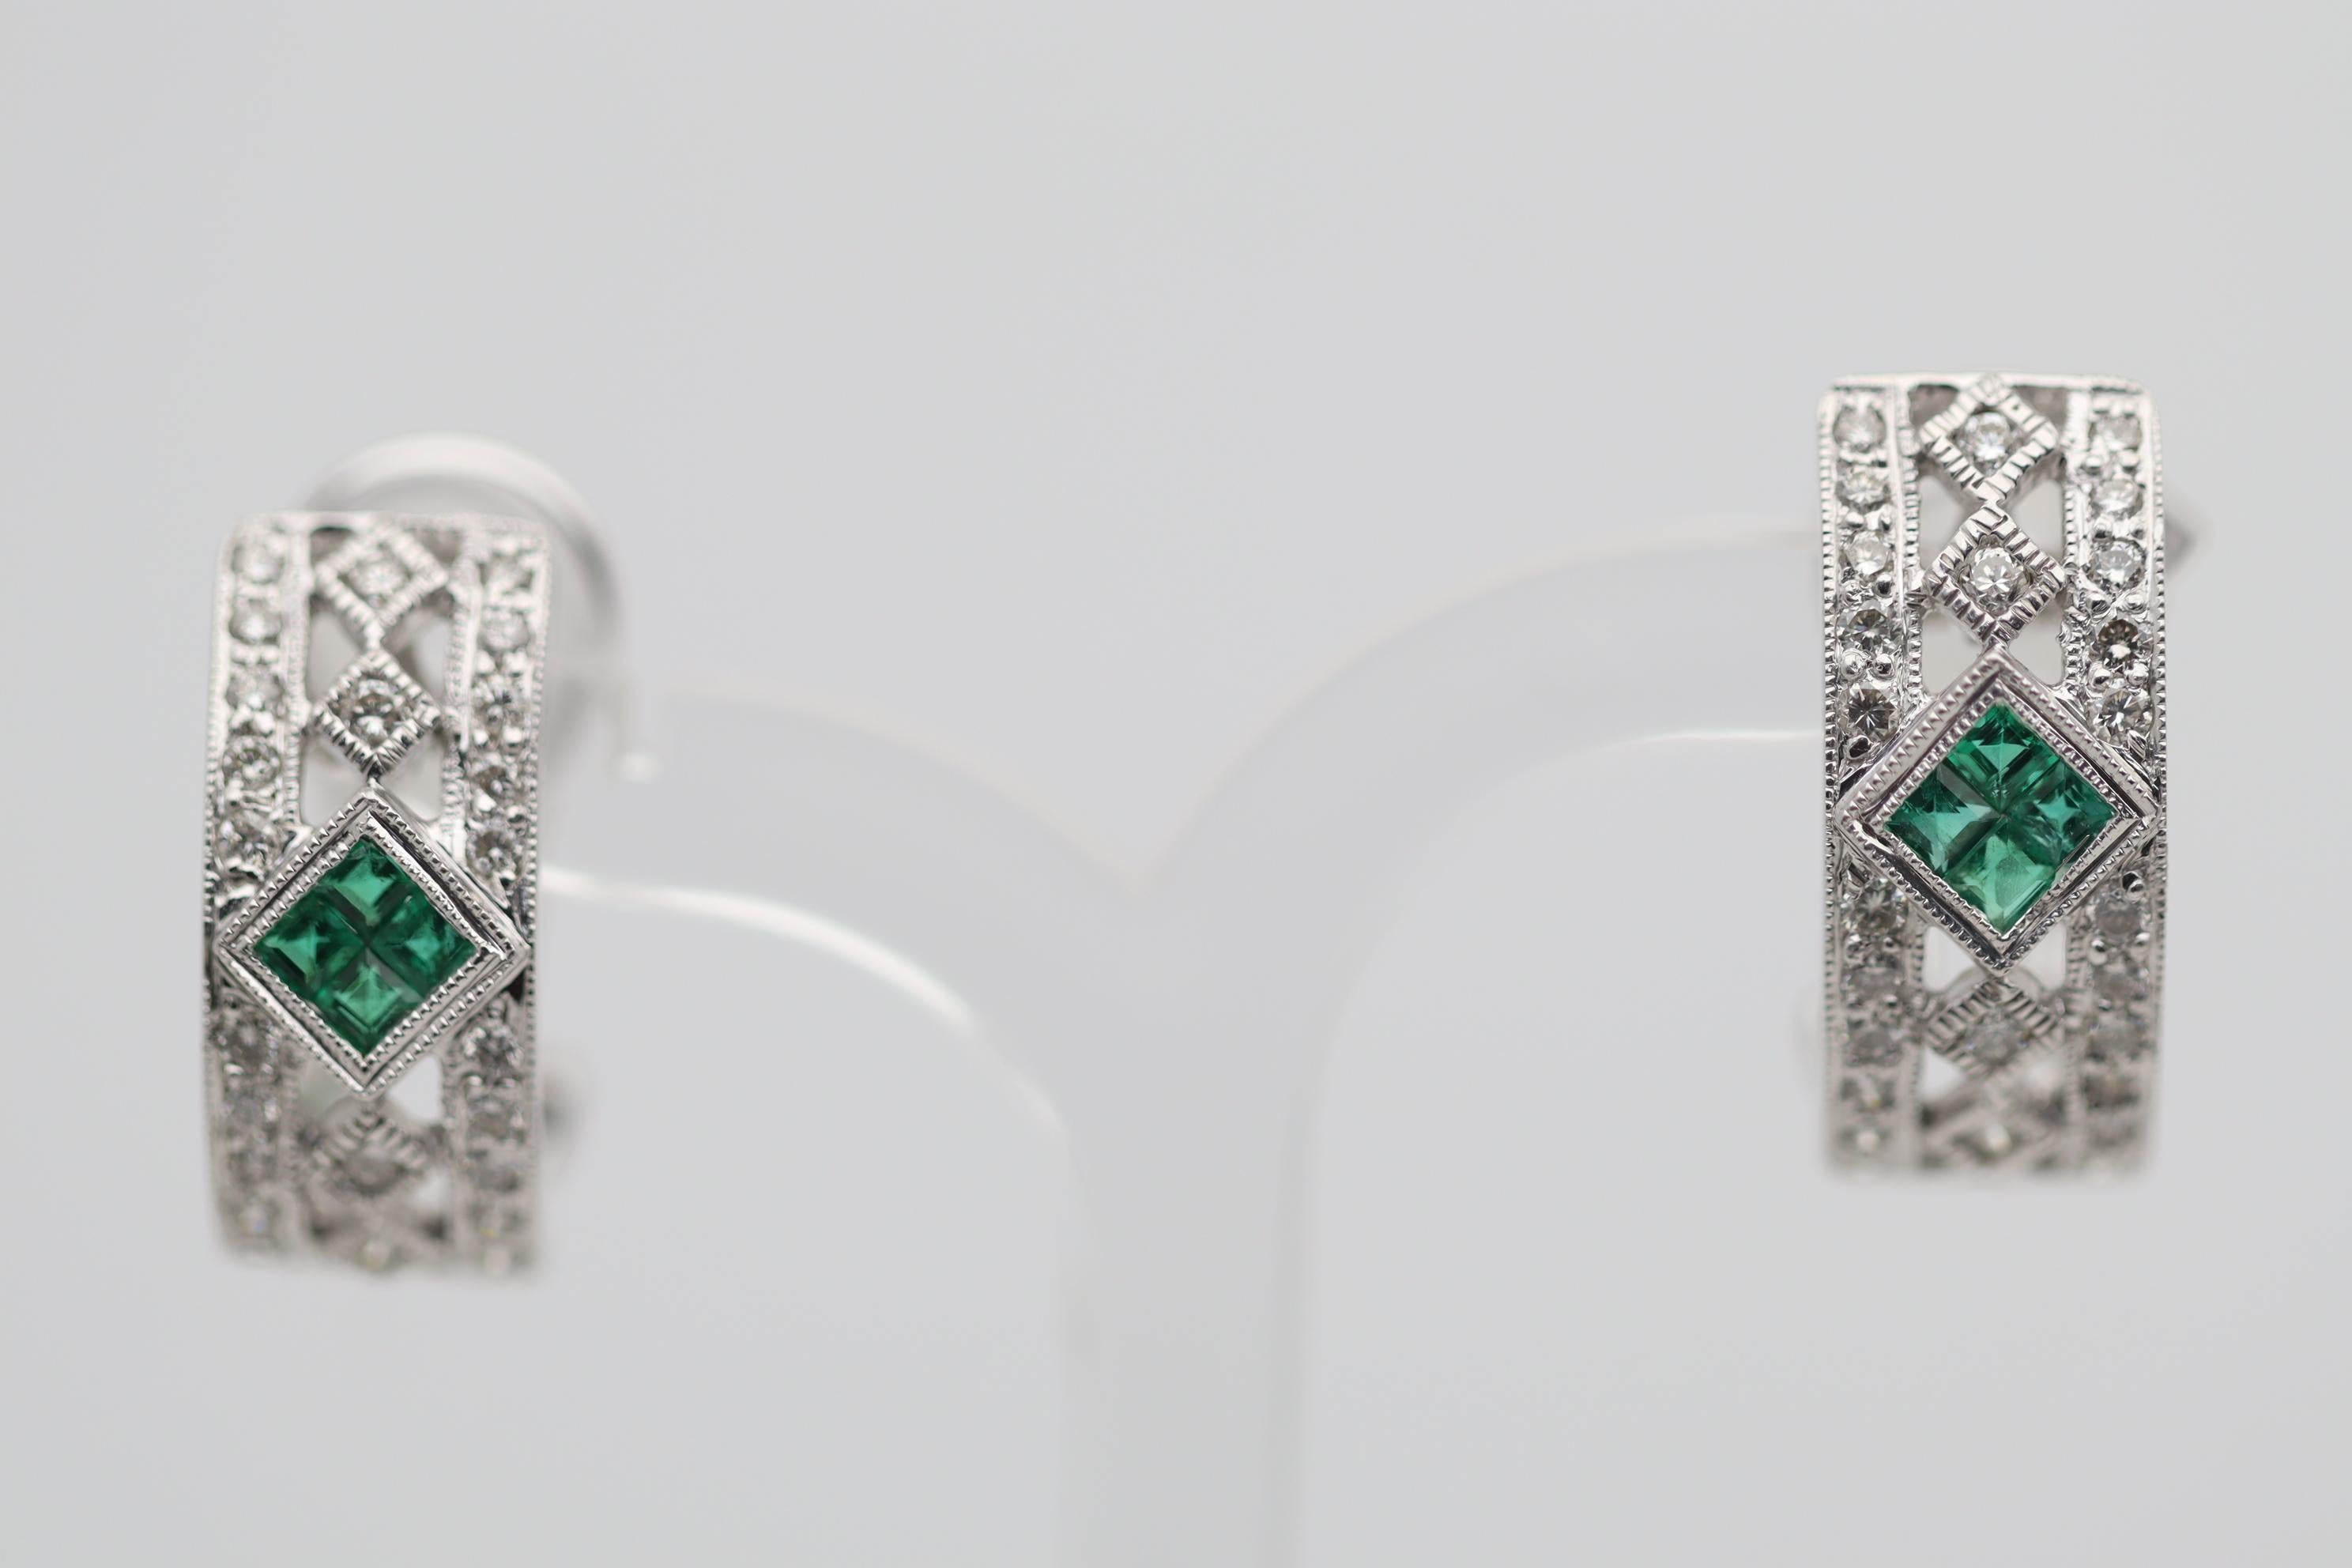 A sweet and stylish pair of 18k gold earrings made in the antique style. It features 0.54 carats of square-shape emeralds and 0.62 carats of round brilliant-cut diamonds. Adding to that, the earrings possess fine filigree with hand applied milgrain